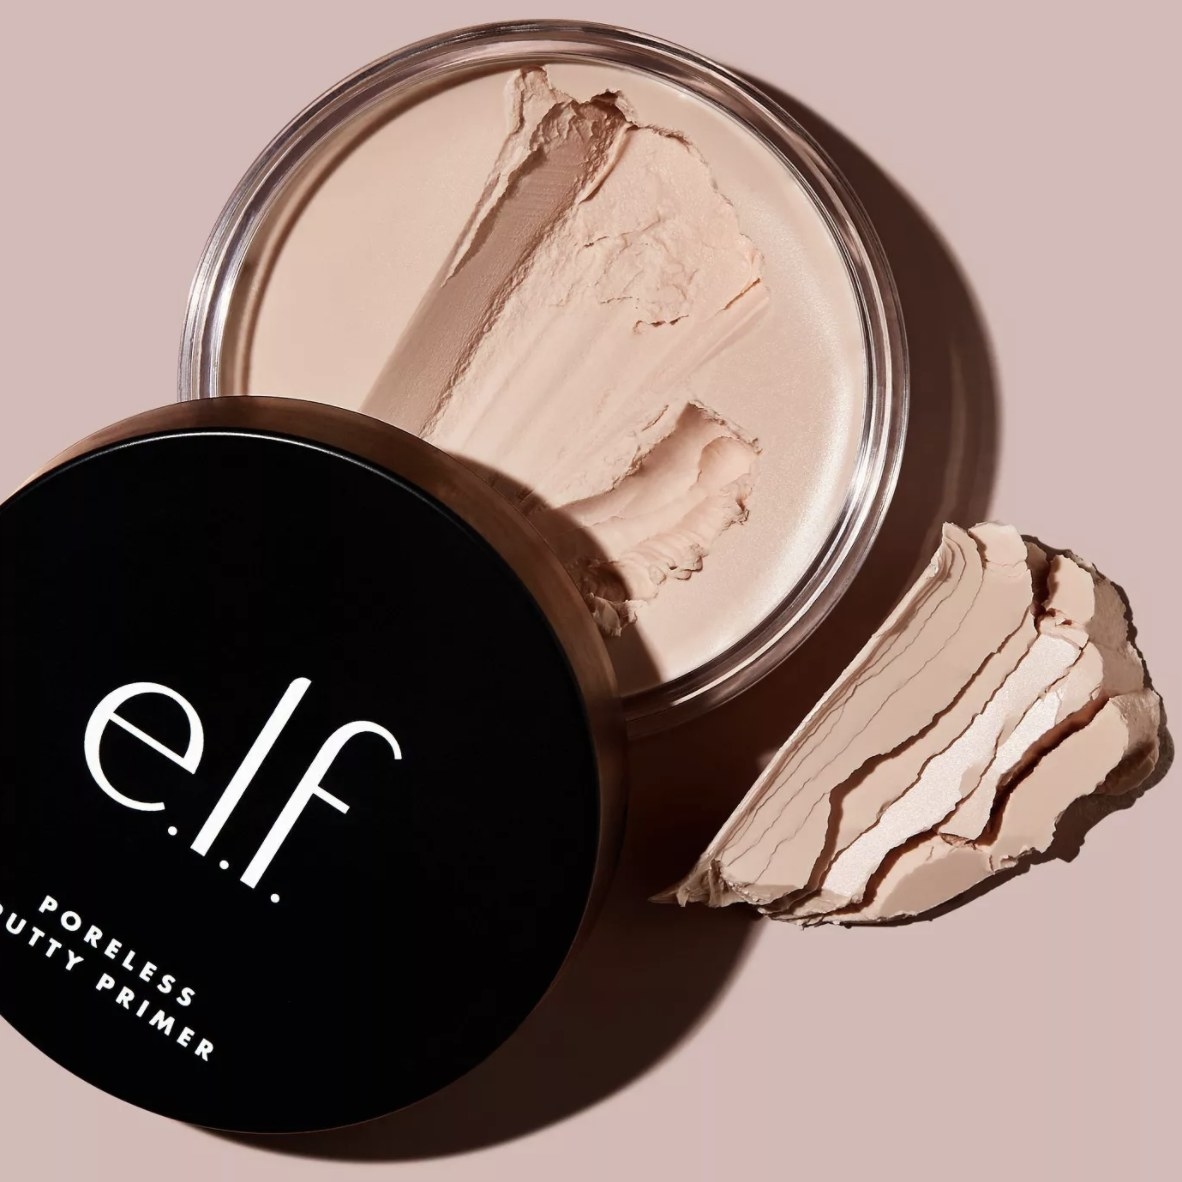 The light pink primer has chunks taken out for a texture sample and has a black lid that says &quot;e.l.f. poreless putty primer&quot;